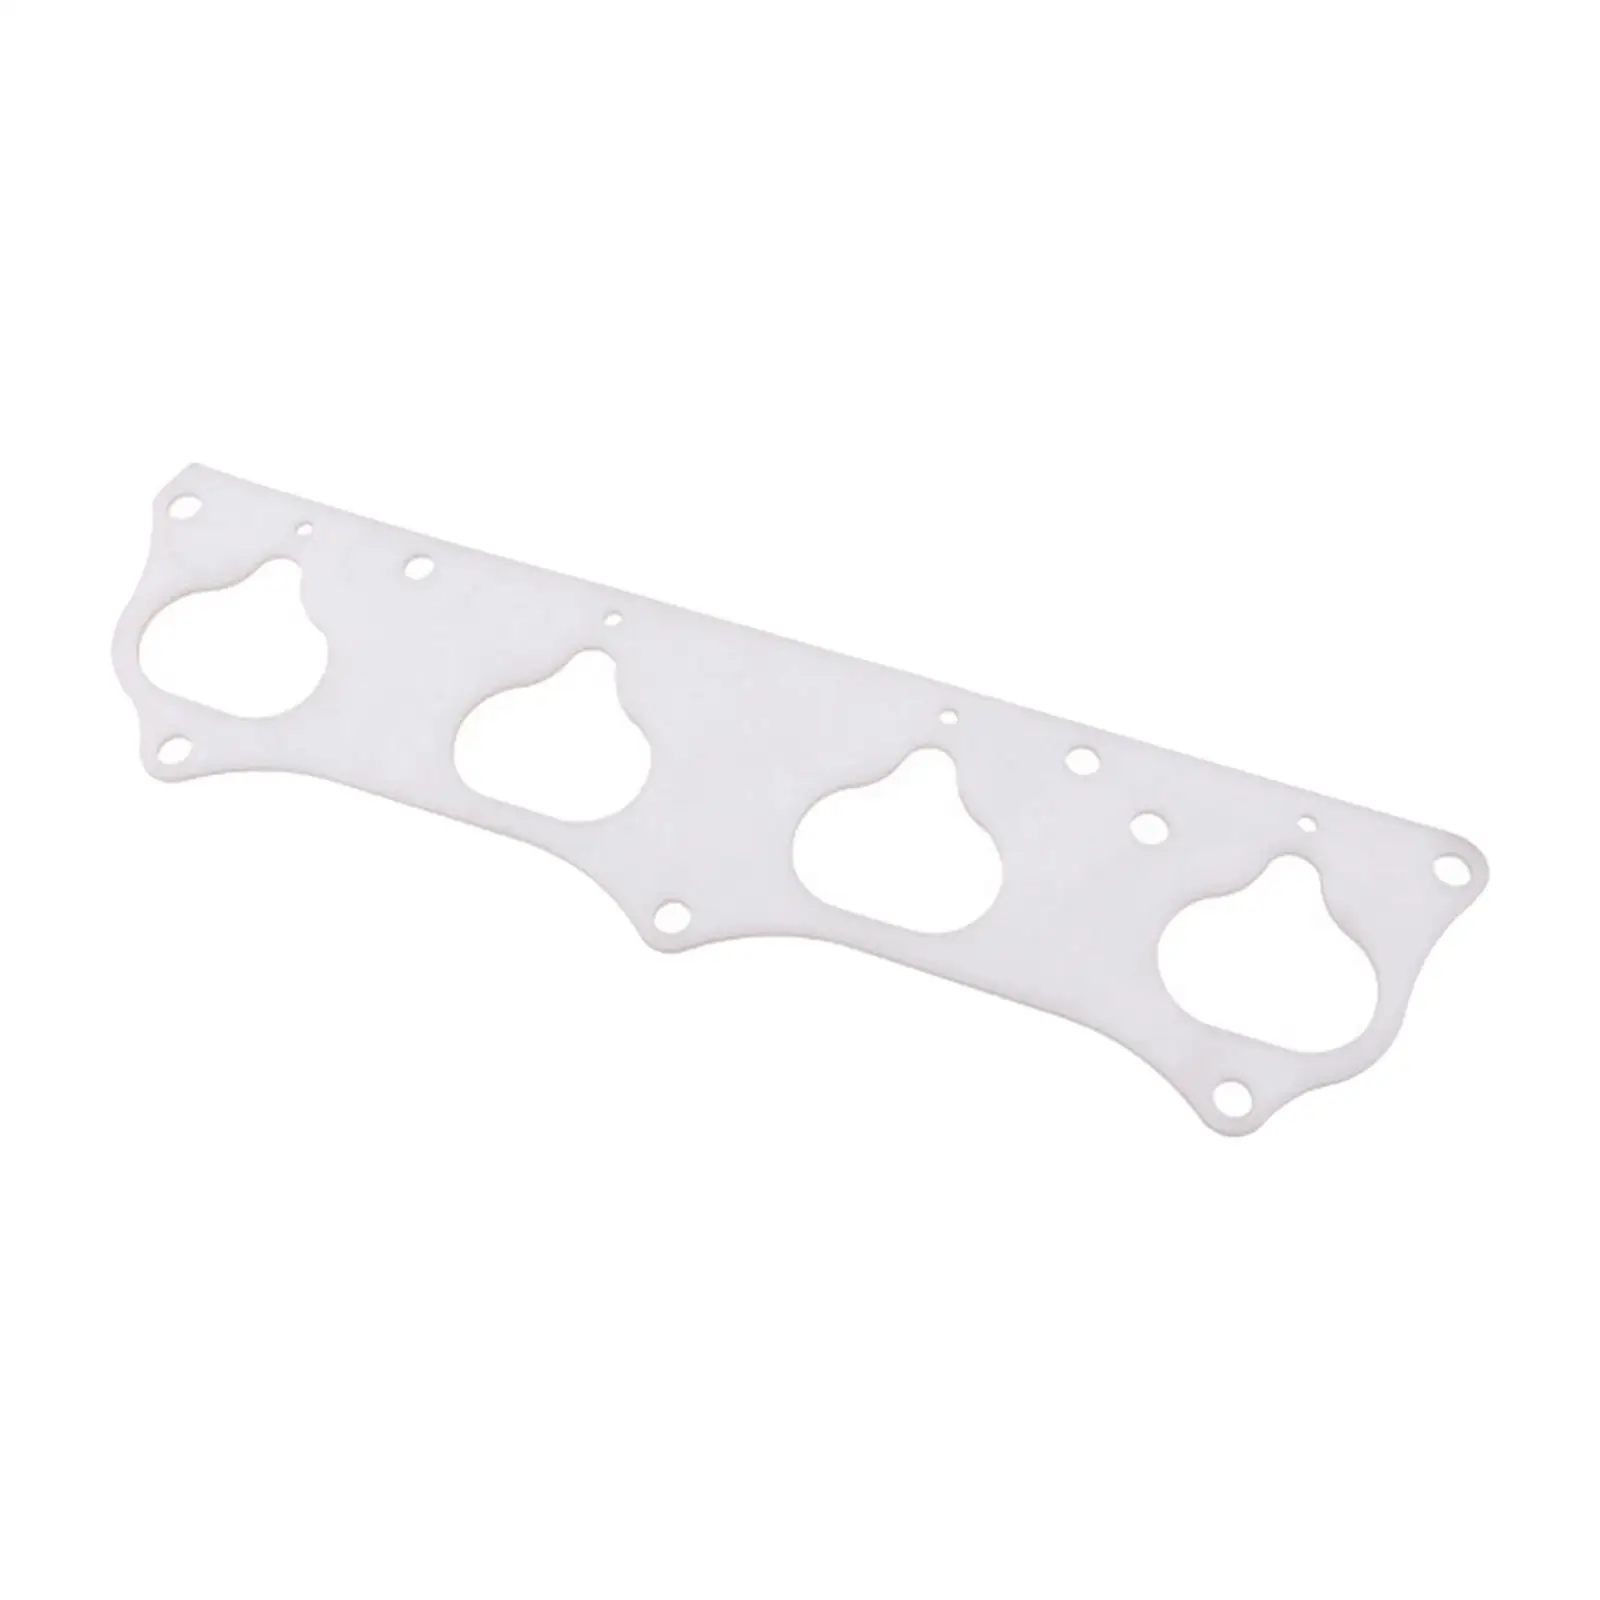 Thermal Intake Manifold Gasket Durable Premium High Performance Spare Parts Replaces for Swap K20A/A2/A3/Z1 K-series